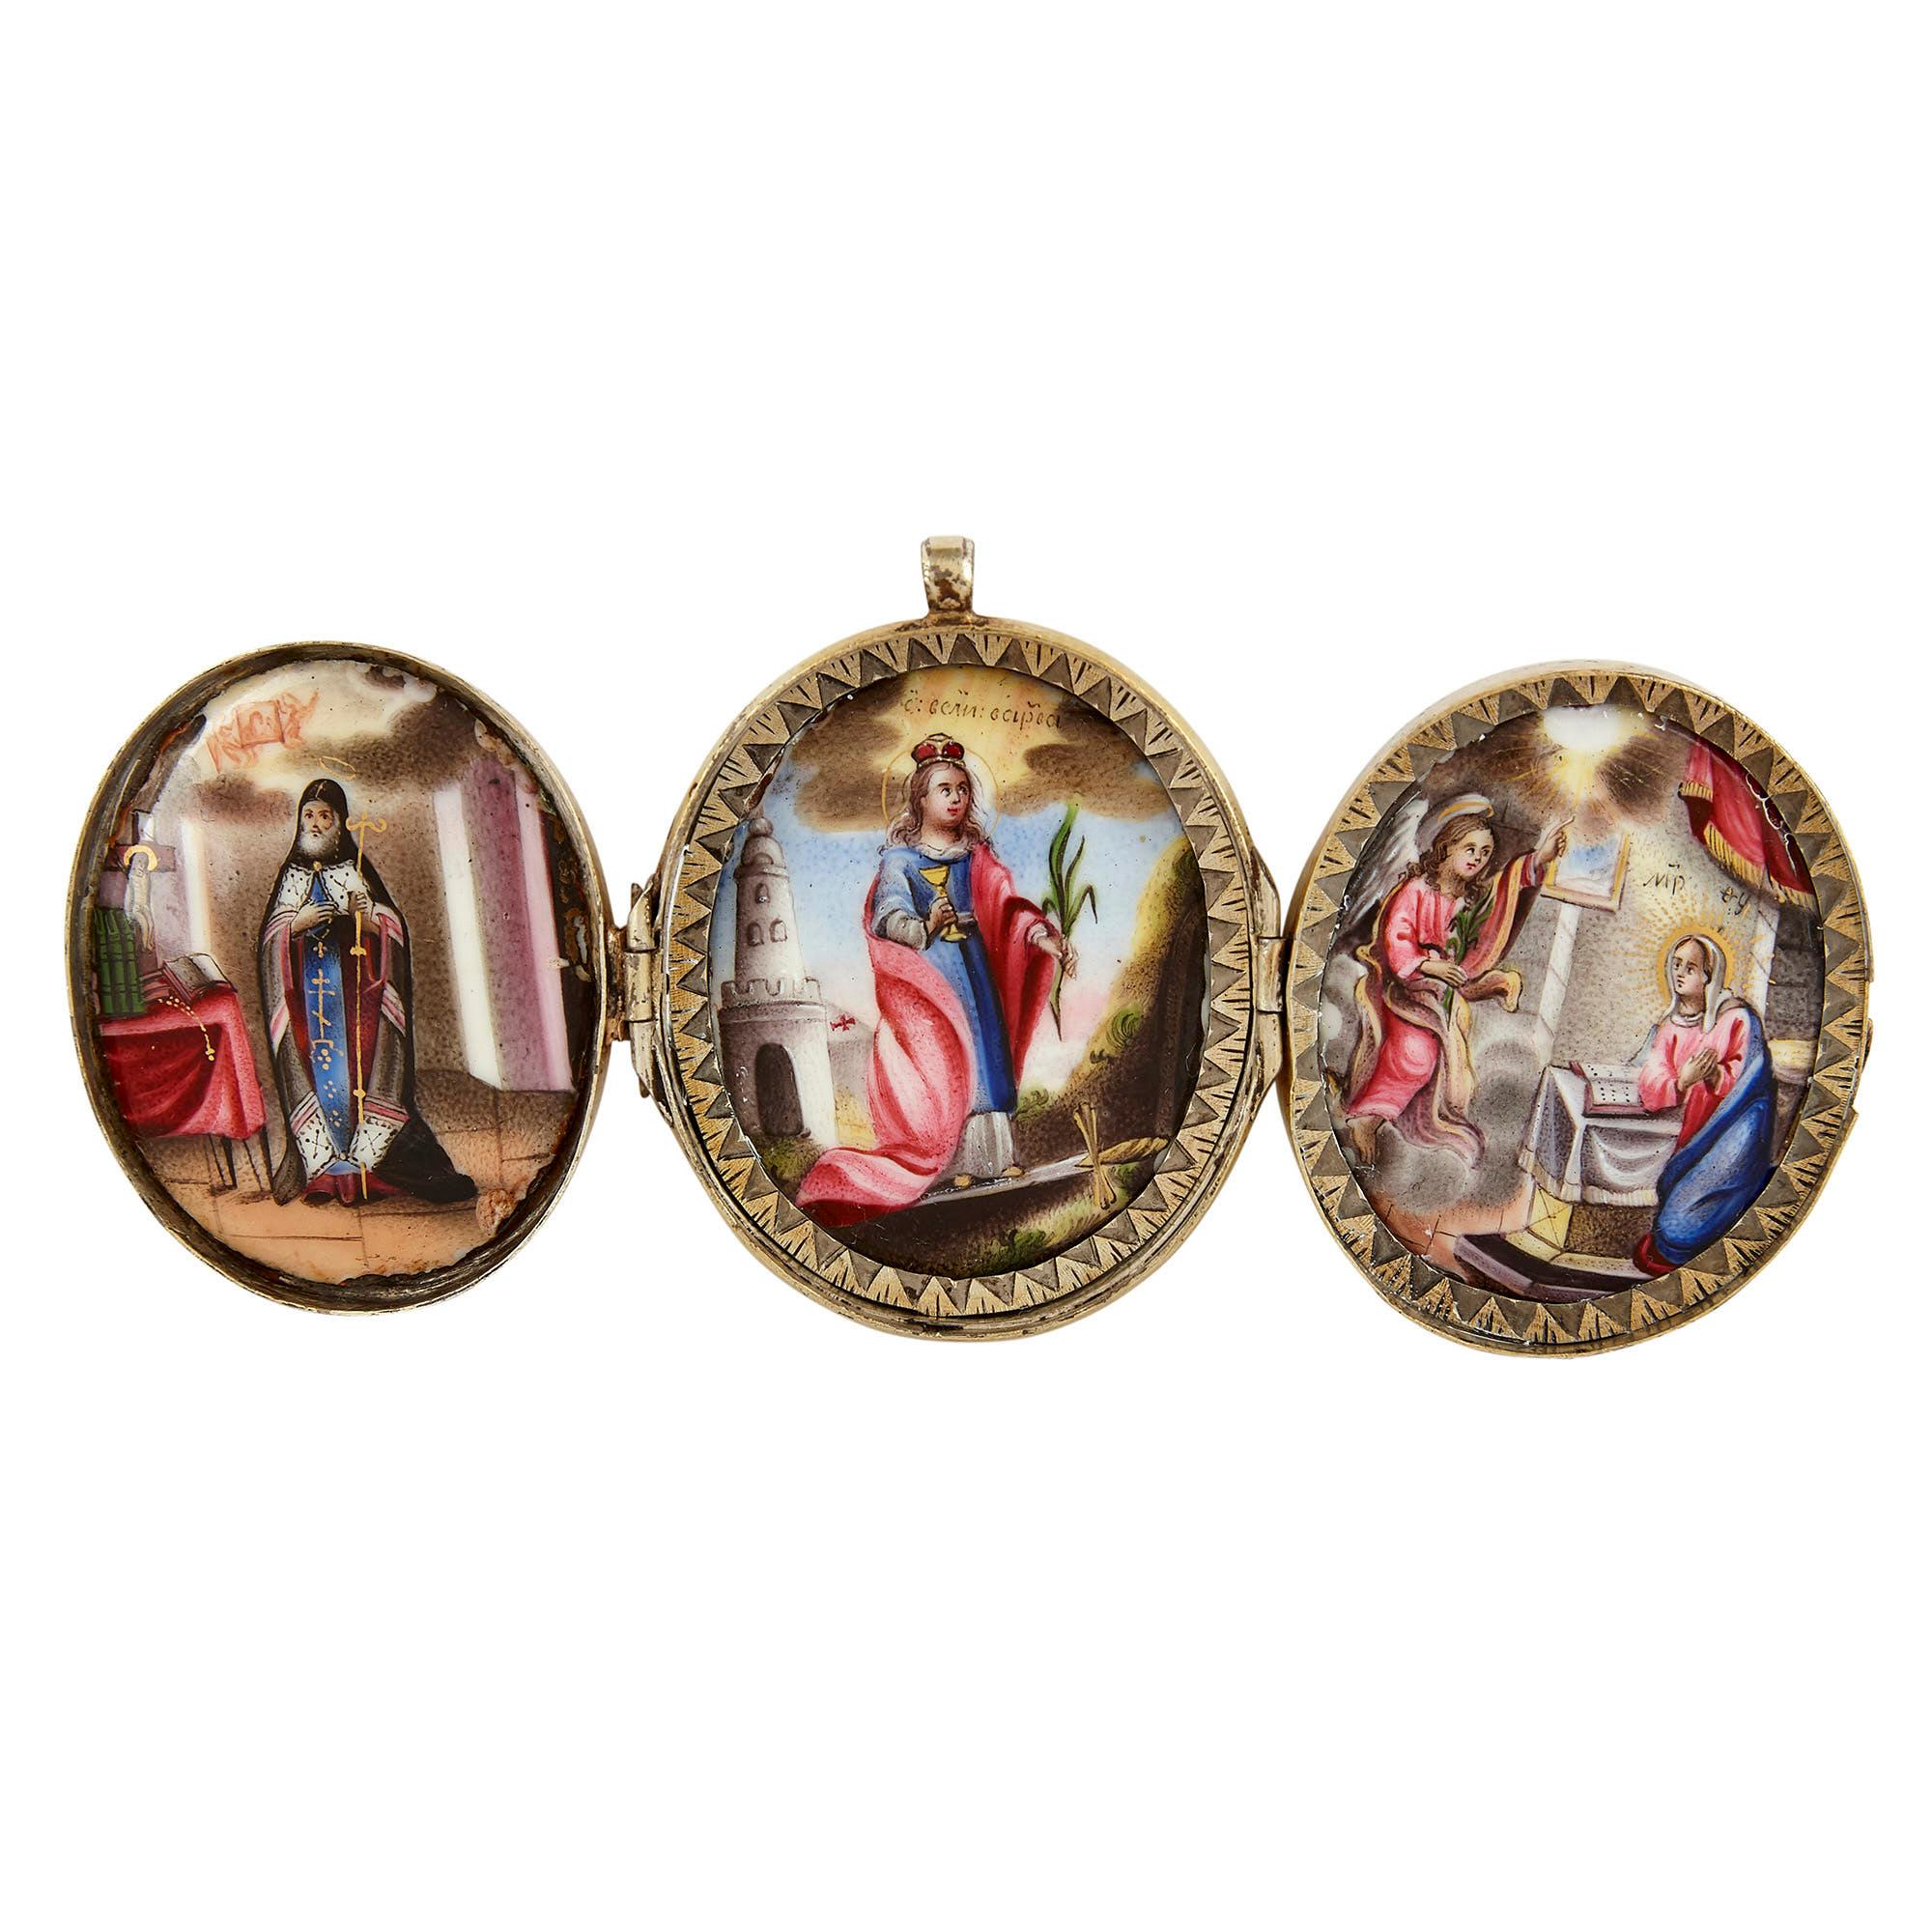 Antique Russian painted enamel and vermeil folding triptych locket
Russian, 19th Century
When open: Height 5cm, width 11cm, depth 1cm
When closed: Height 5cm, width 4cm, depth 1cm

This wonderful triptych locket is crafted from vermeil, or